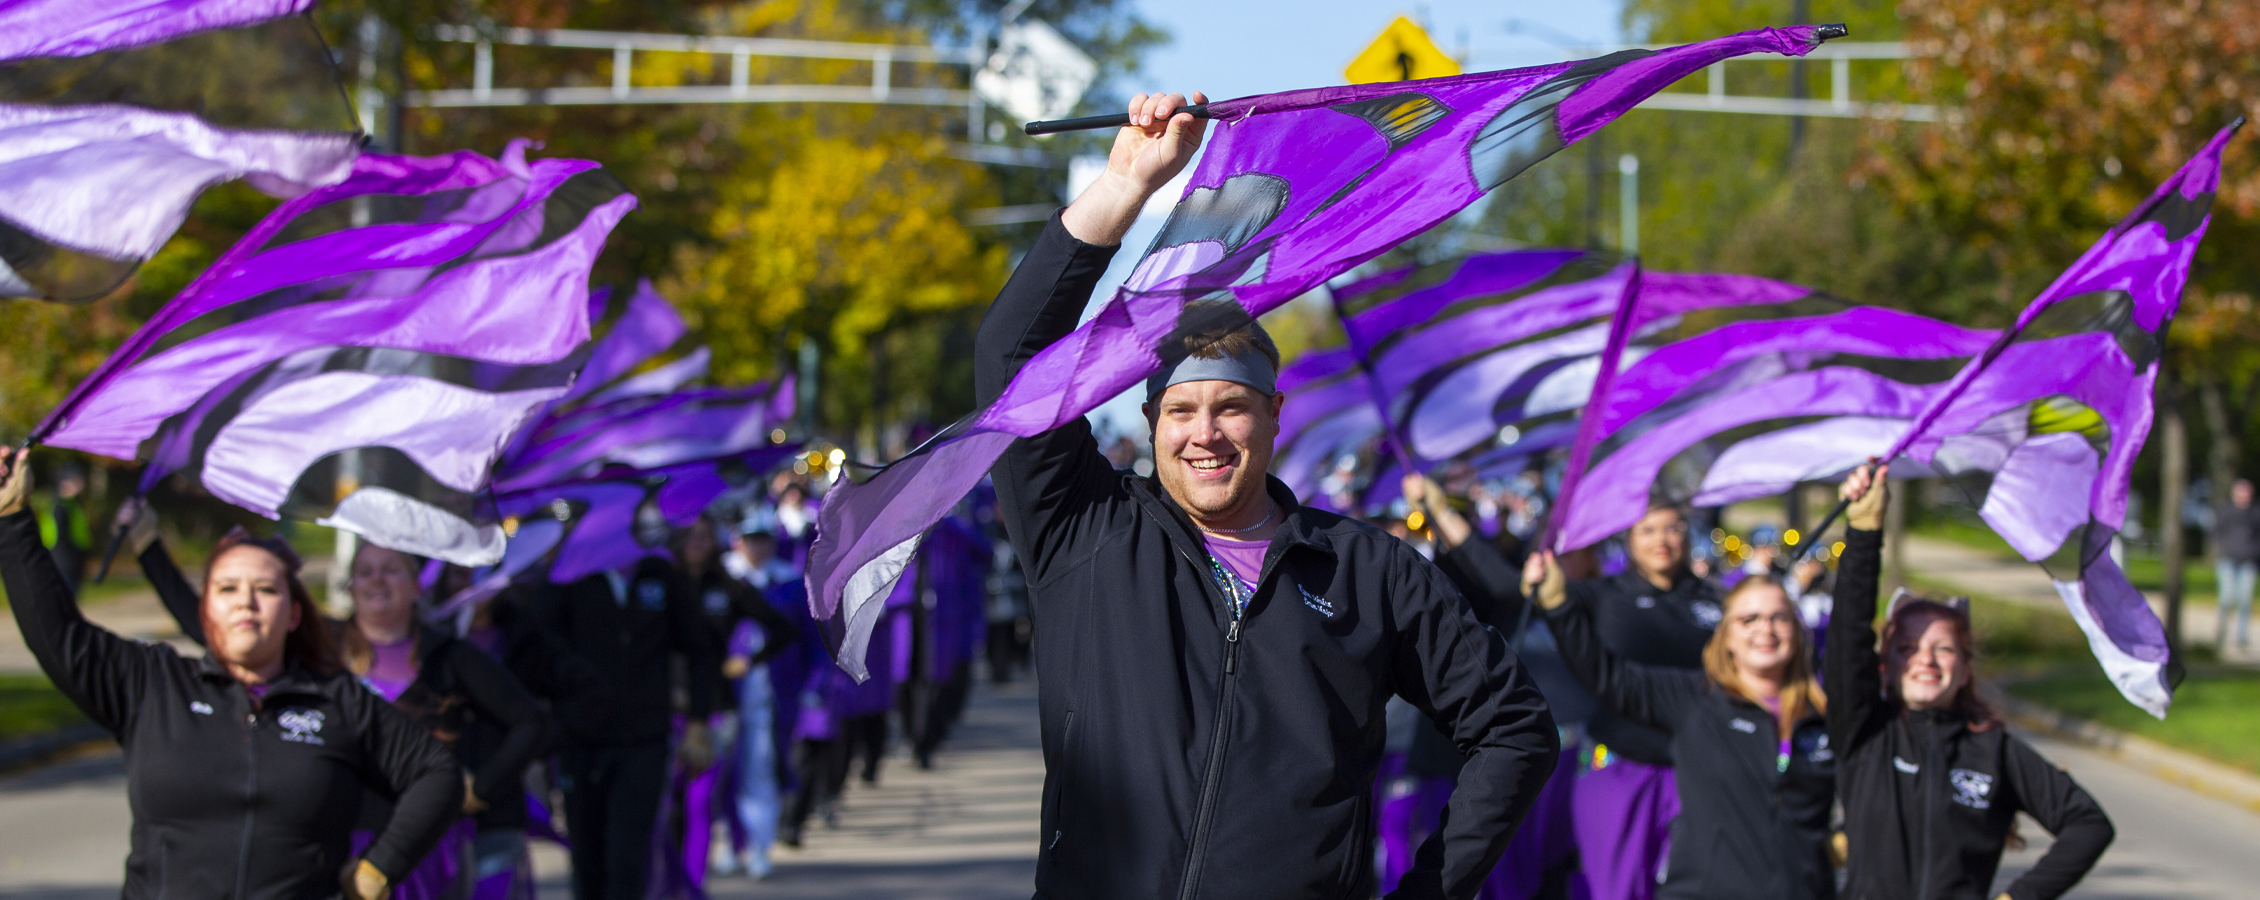 The Color Guard marches in the parade with purple flags in the air.